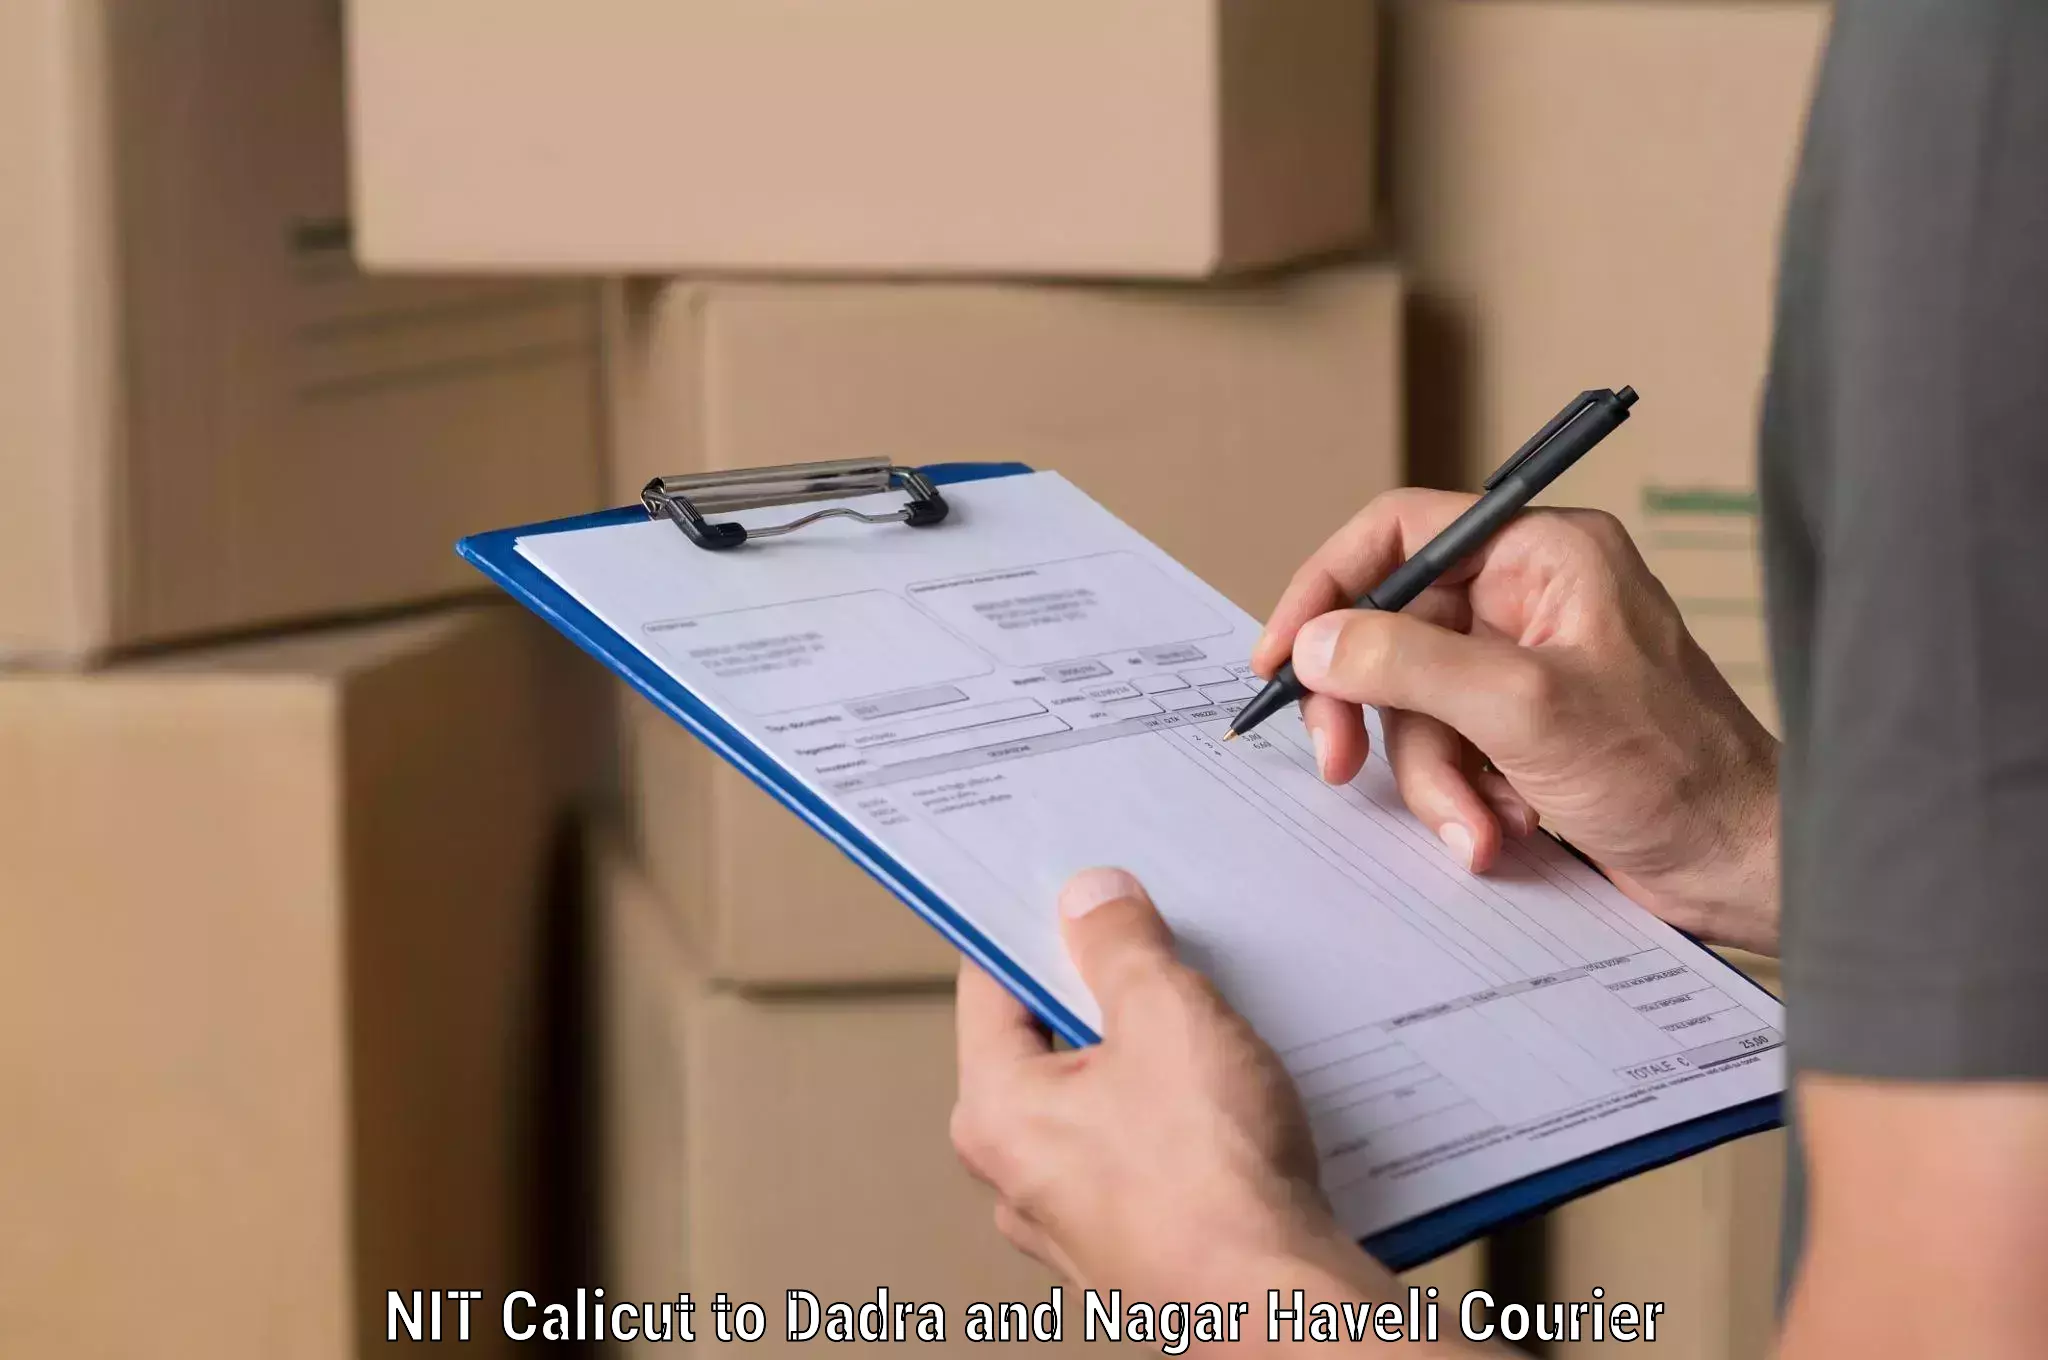 Professional courier services NIT Calicut to Dadra and Nagar Haveli